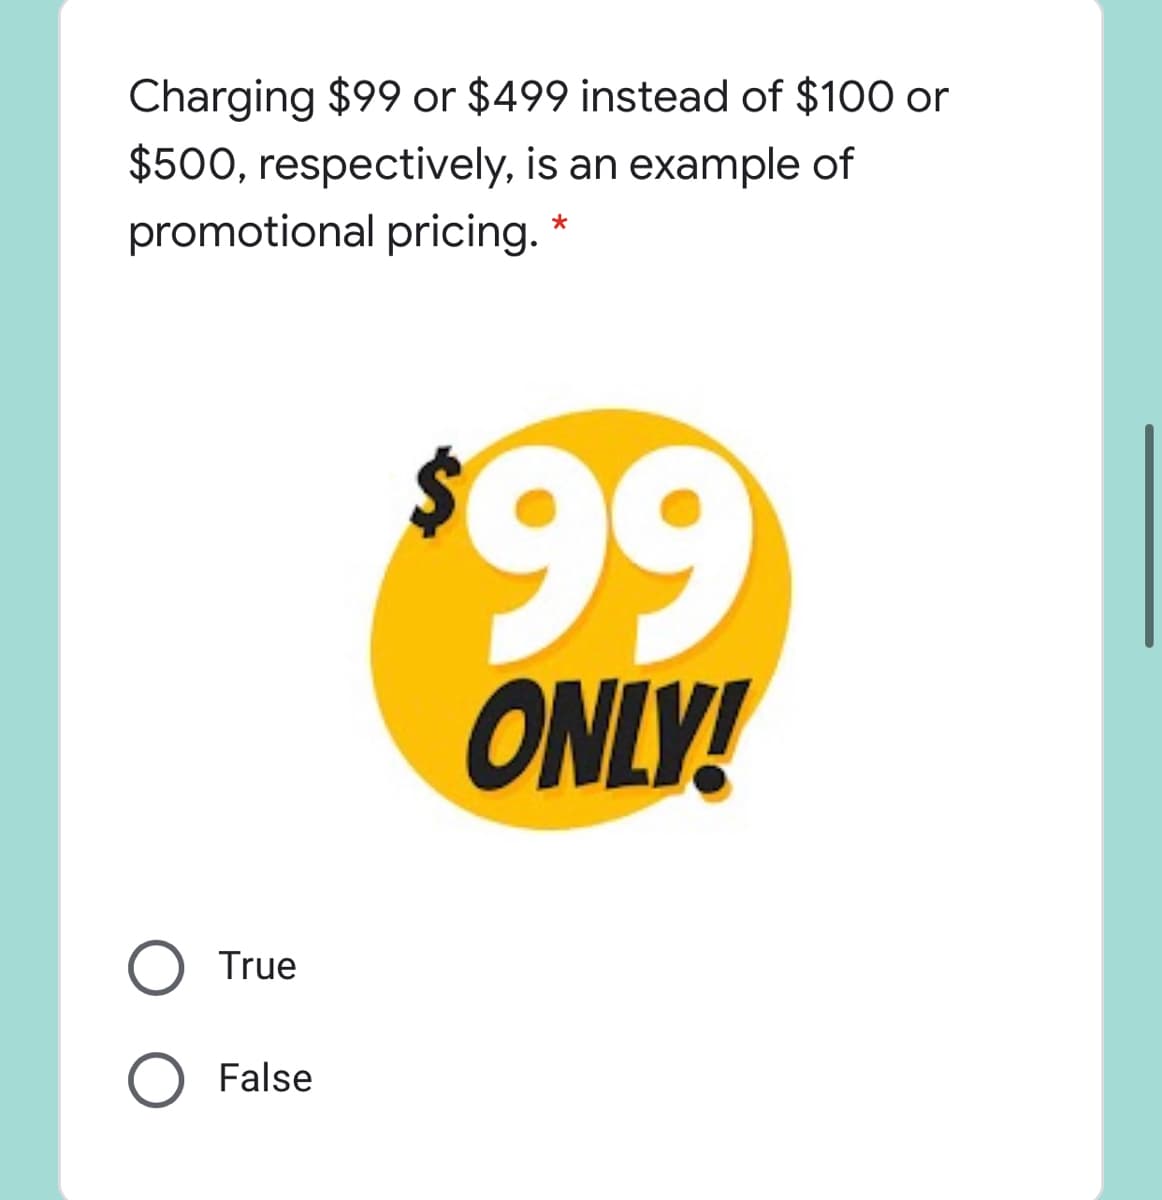 Charging $99 or $499 instead of $100 or
$500, respectively, is an example of
promotional pricing. *
99
ONLY!
True
False
